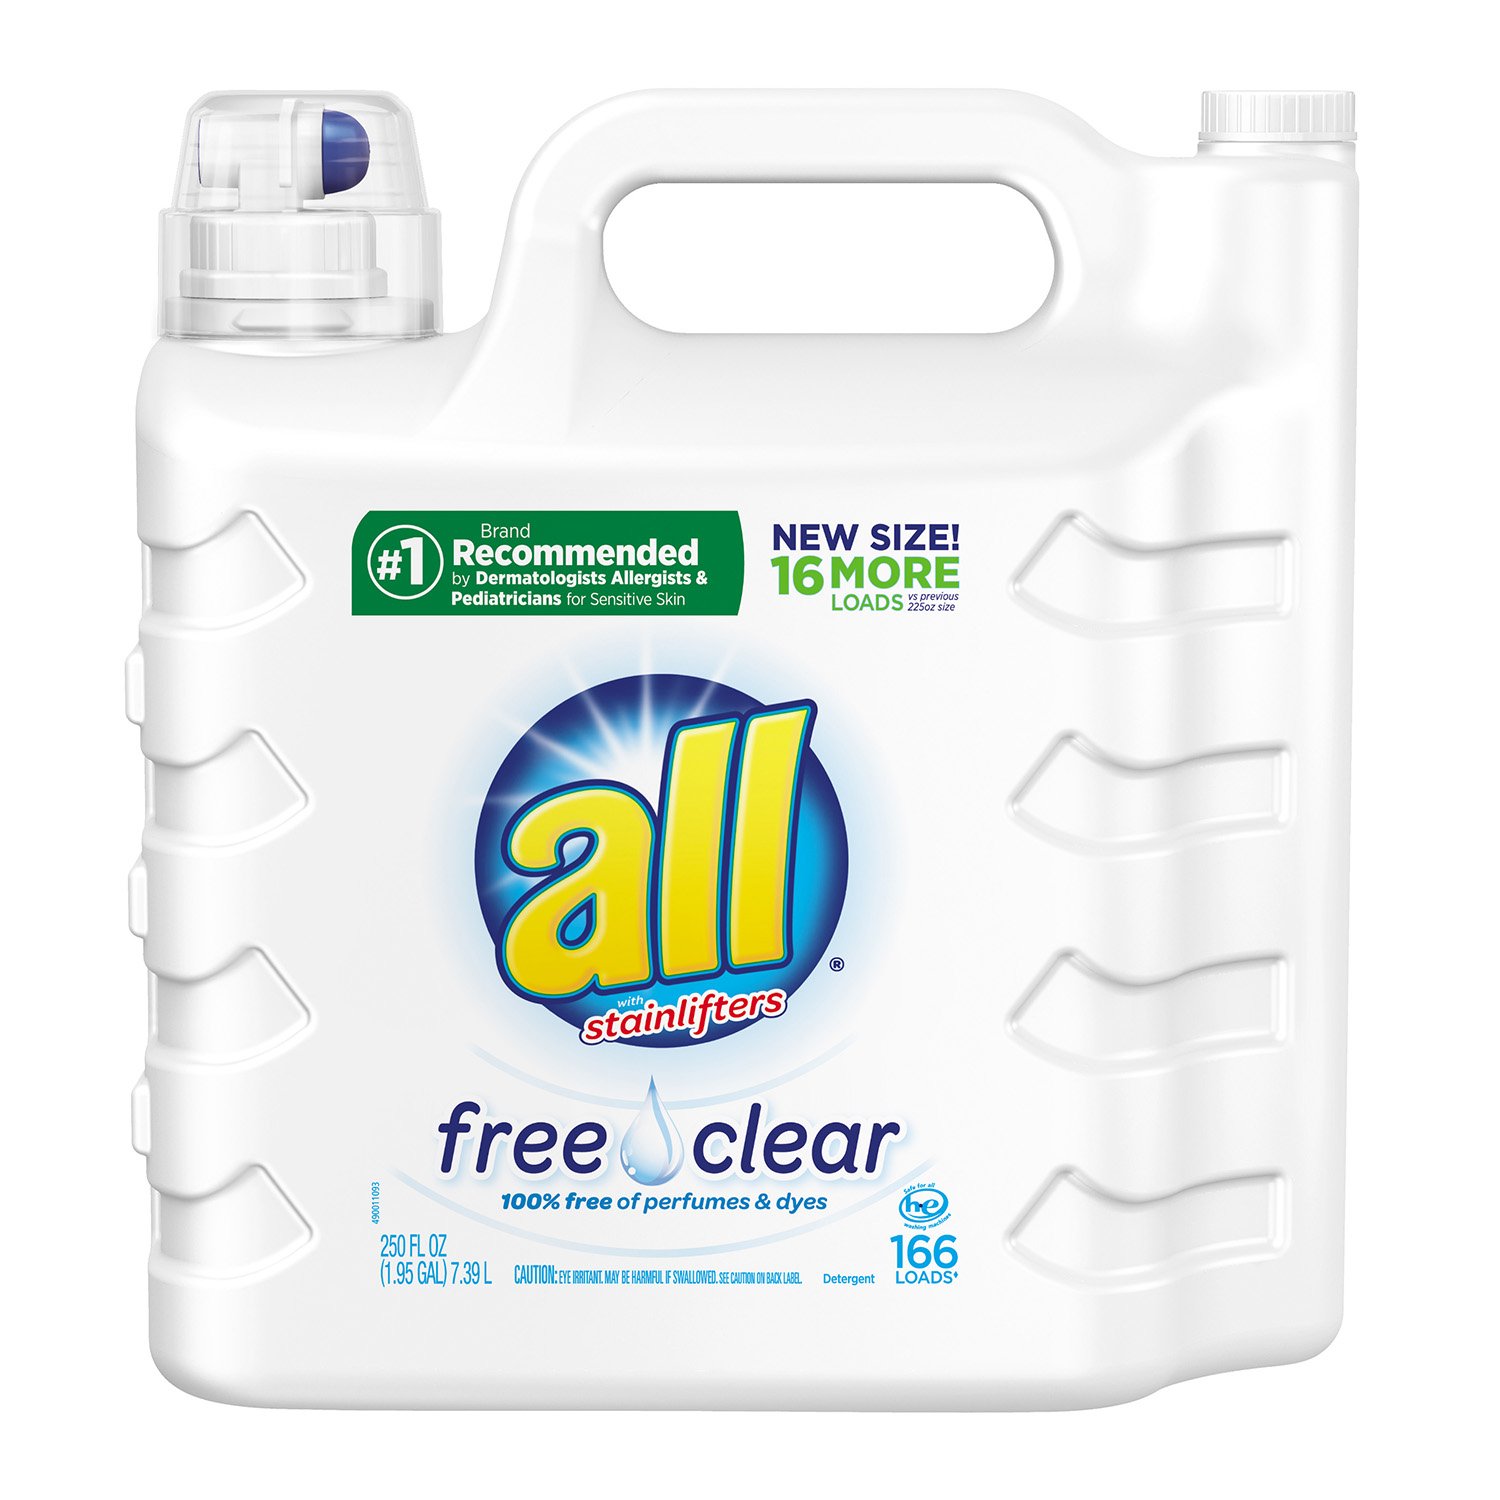 all 2X Ultra with Stainlifter Free & Clear (250 Ounce, 166 loads)